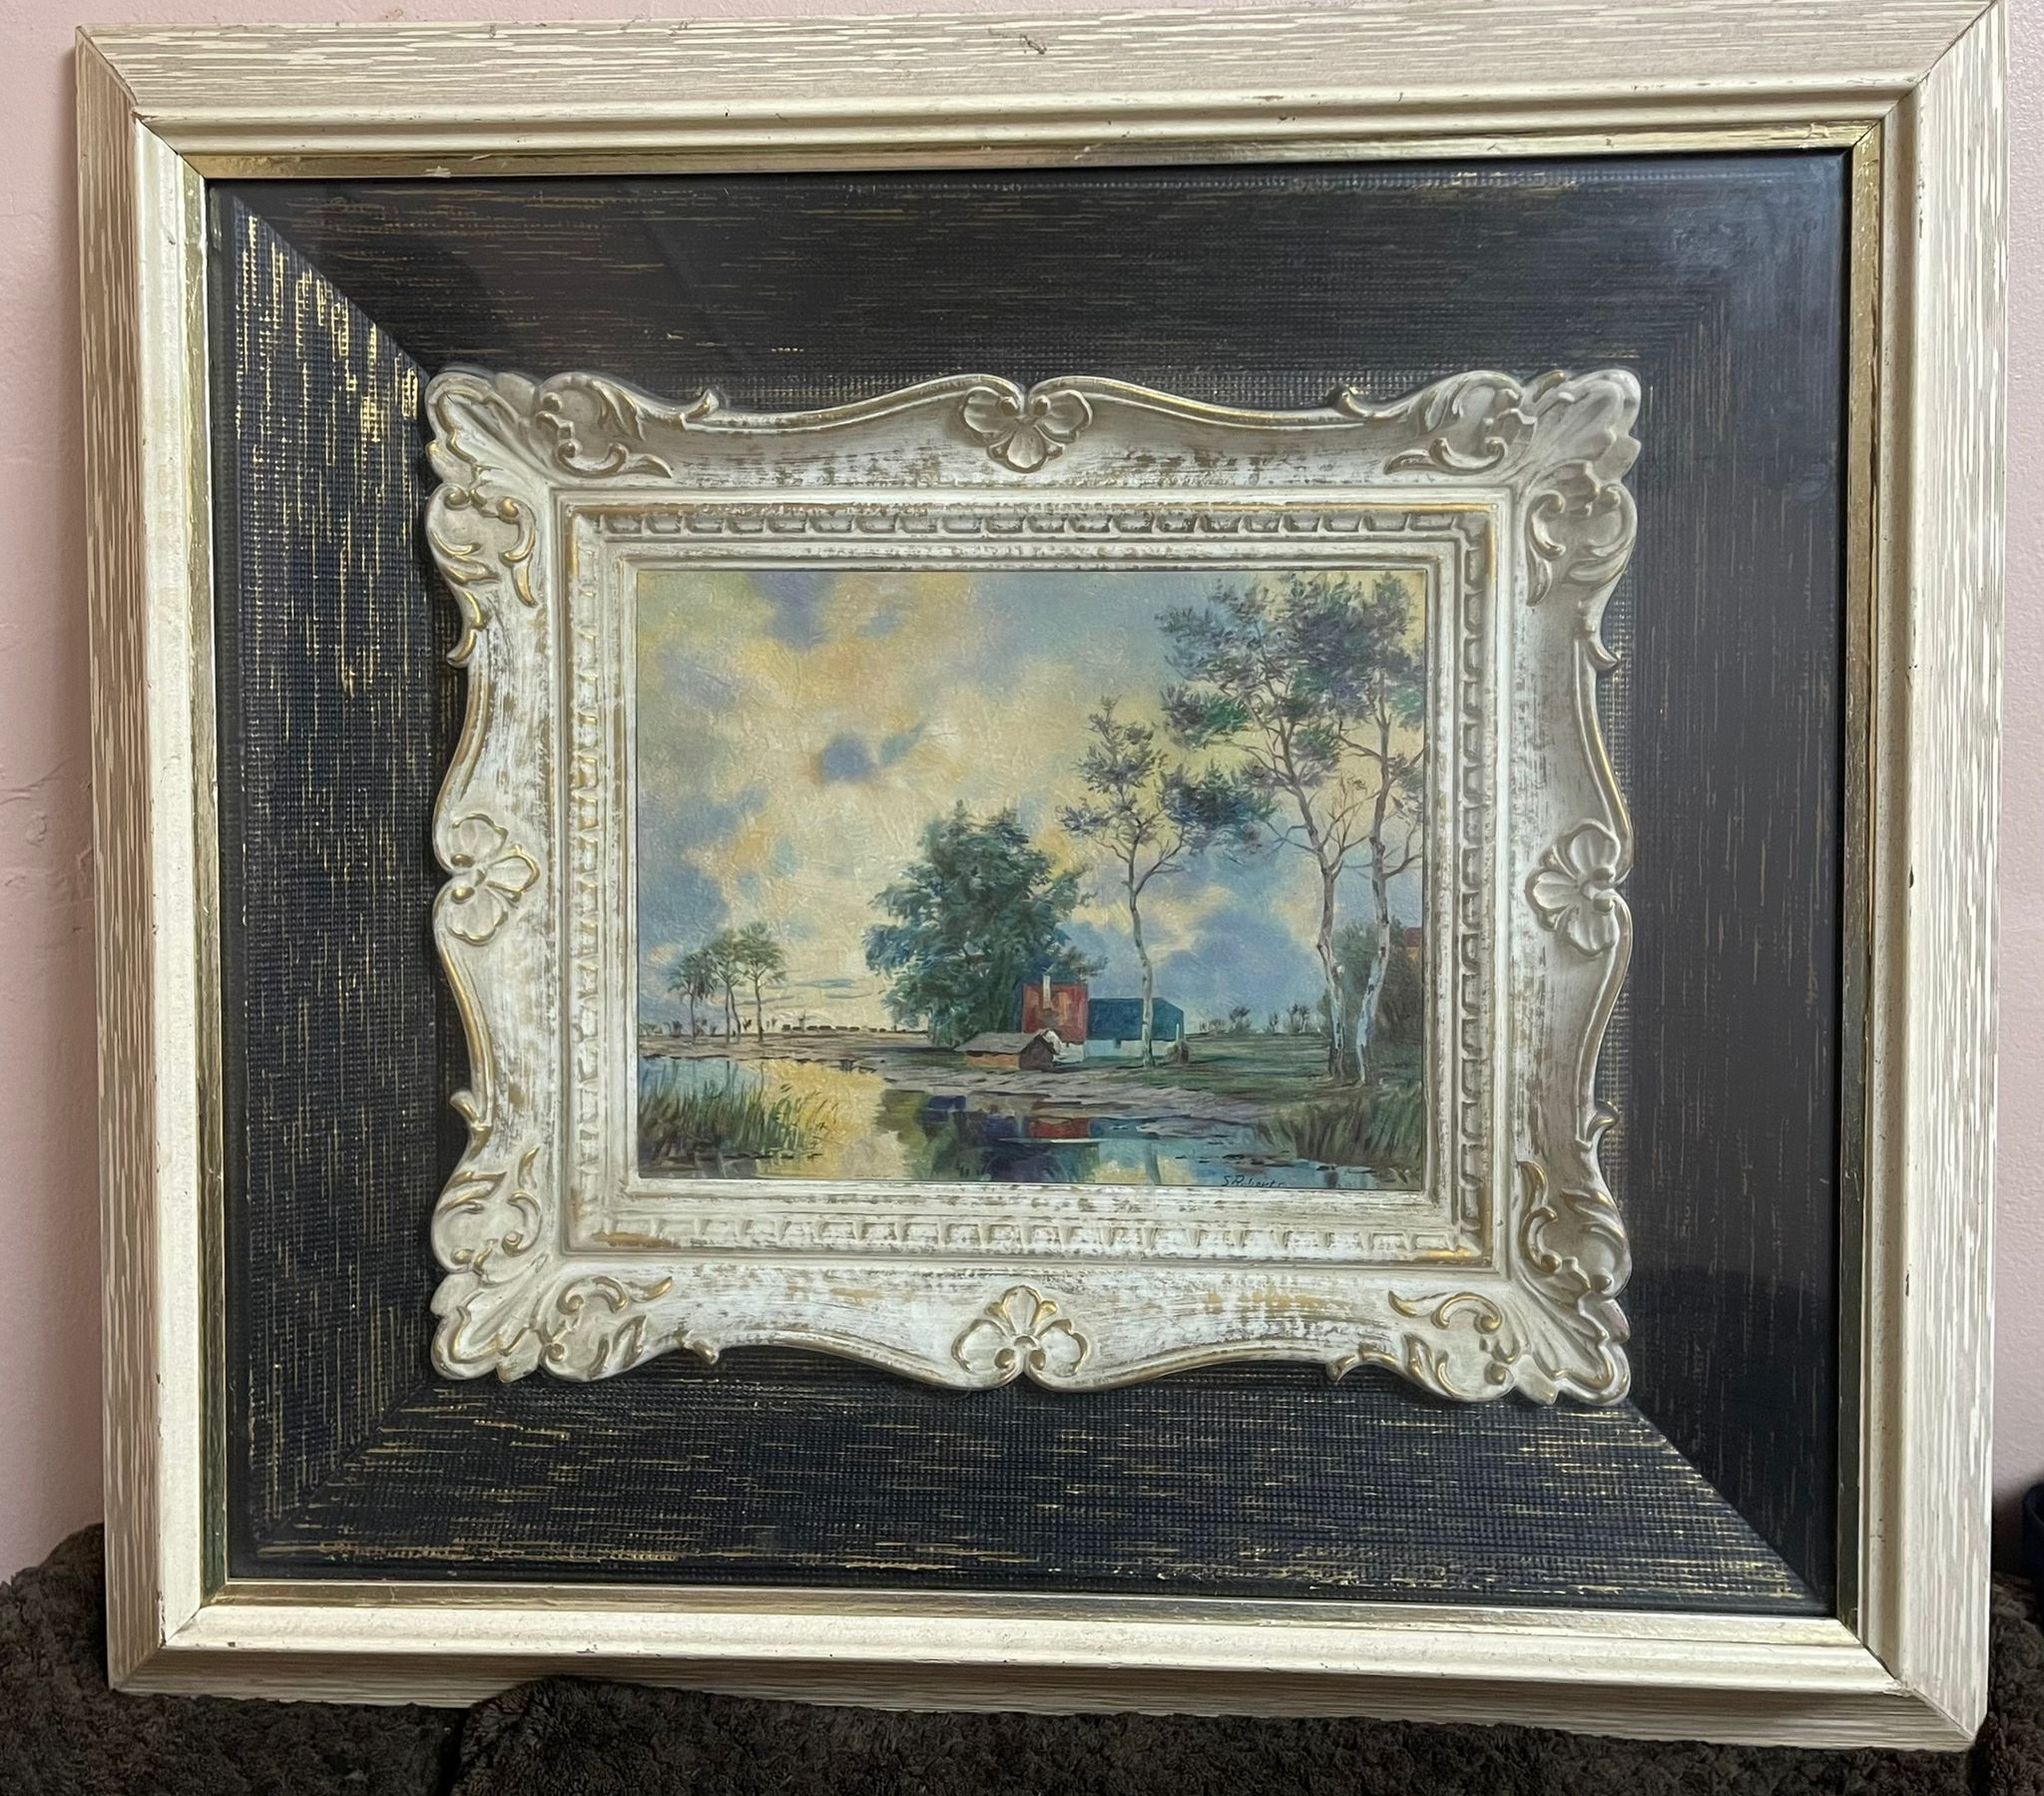 Antique vintage painting by S. Robert & Signed by S. Robert.